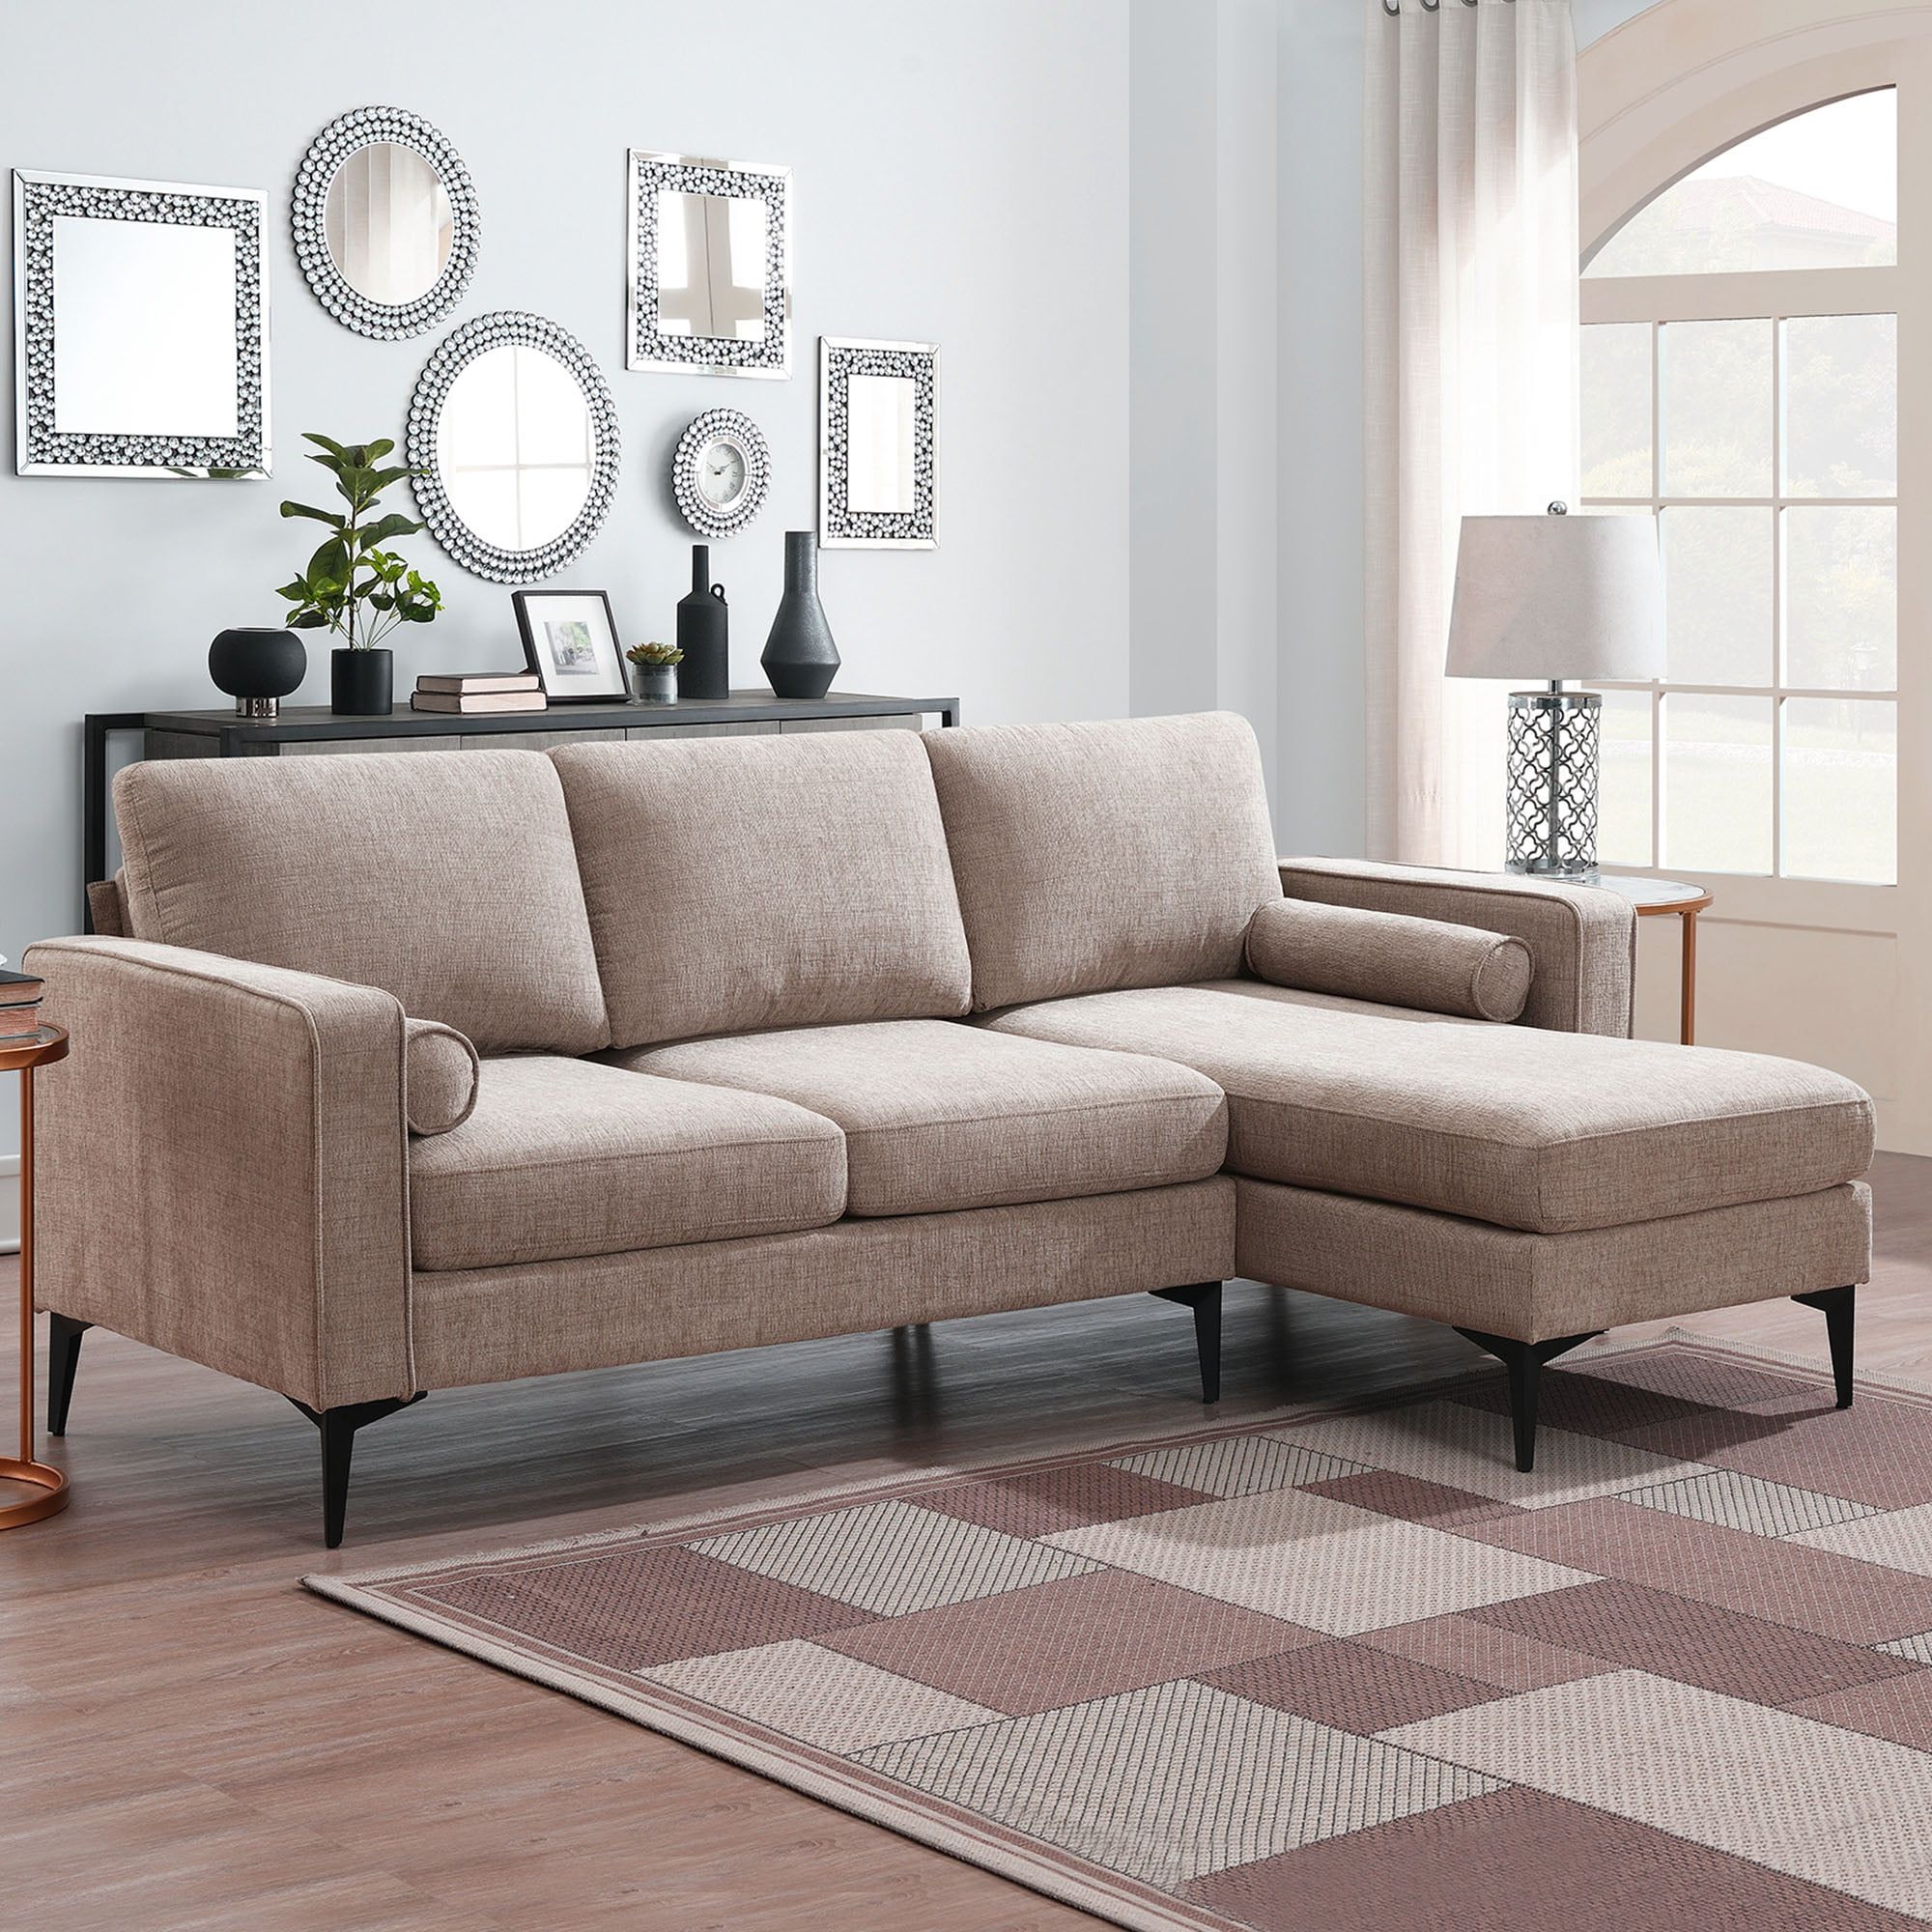 L Shaped Couch, 4 Seater Sectional Couch With Chaise And 2 Pillows, Modern  L Shaped Corner Couch, Heavy Duty Upholstered Sectional Couch, Kamida Sectional  Couch Furniture For Living Room, Light Brown – Walmart In Heavy Duty Sectional Couches (Gallery 11 of 20)